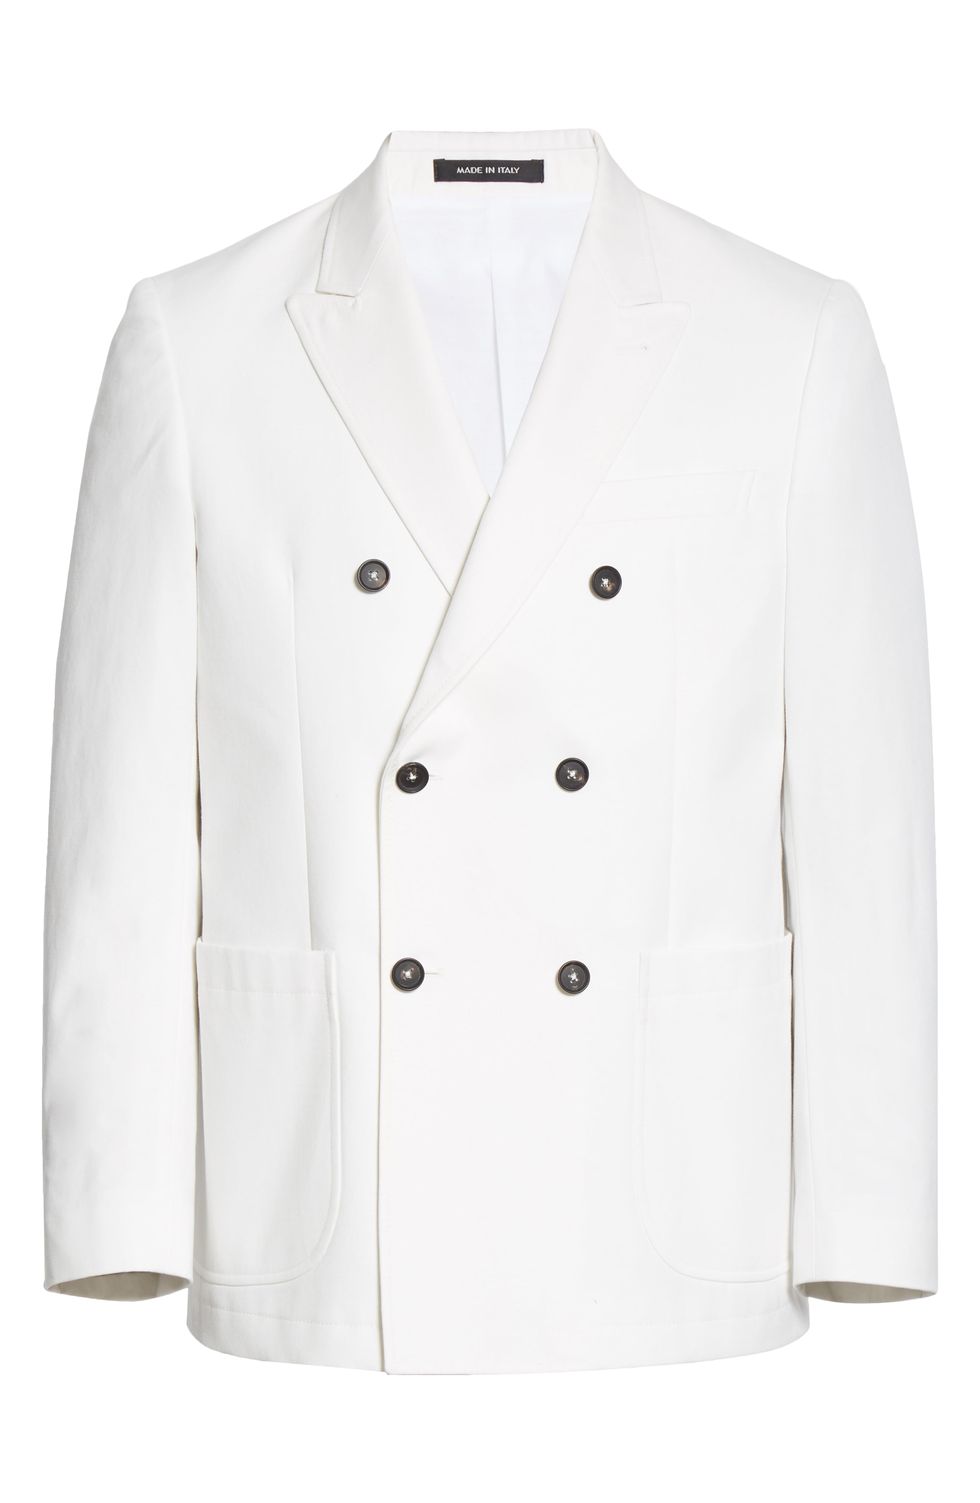 Double-Breasted White Cotton Sport Coat